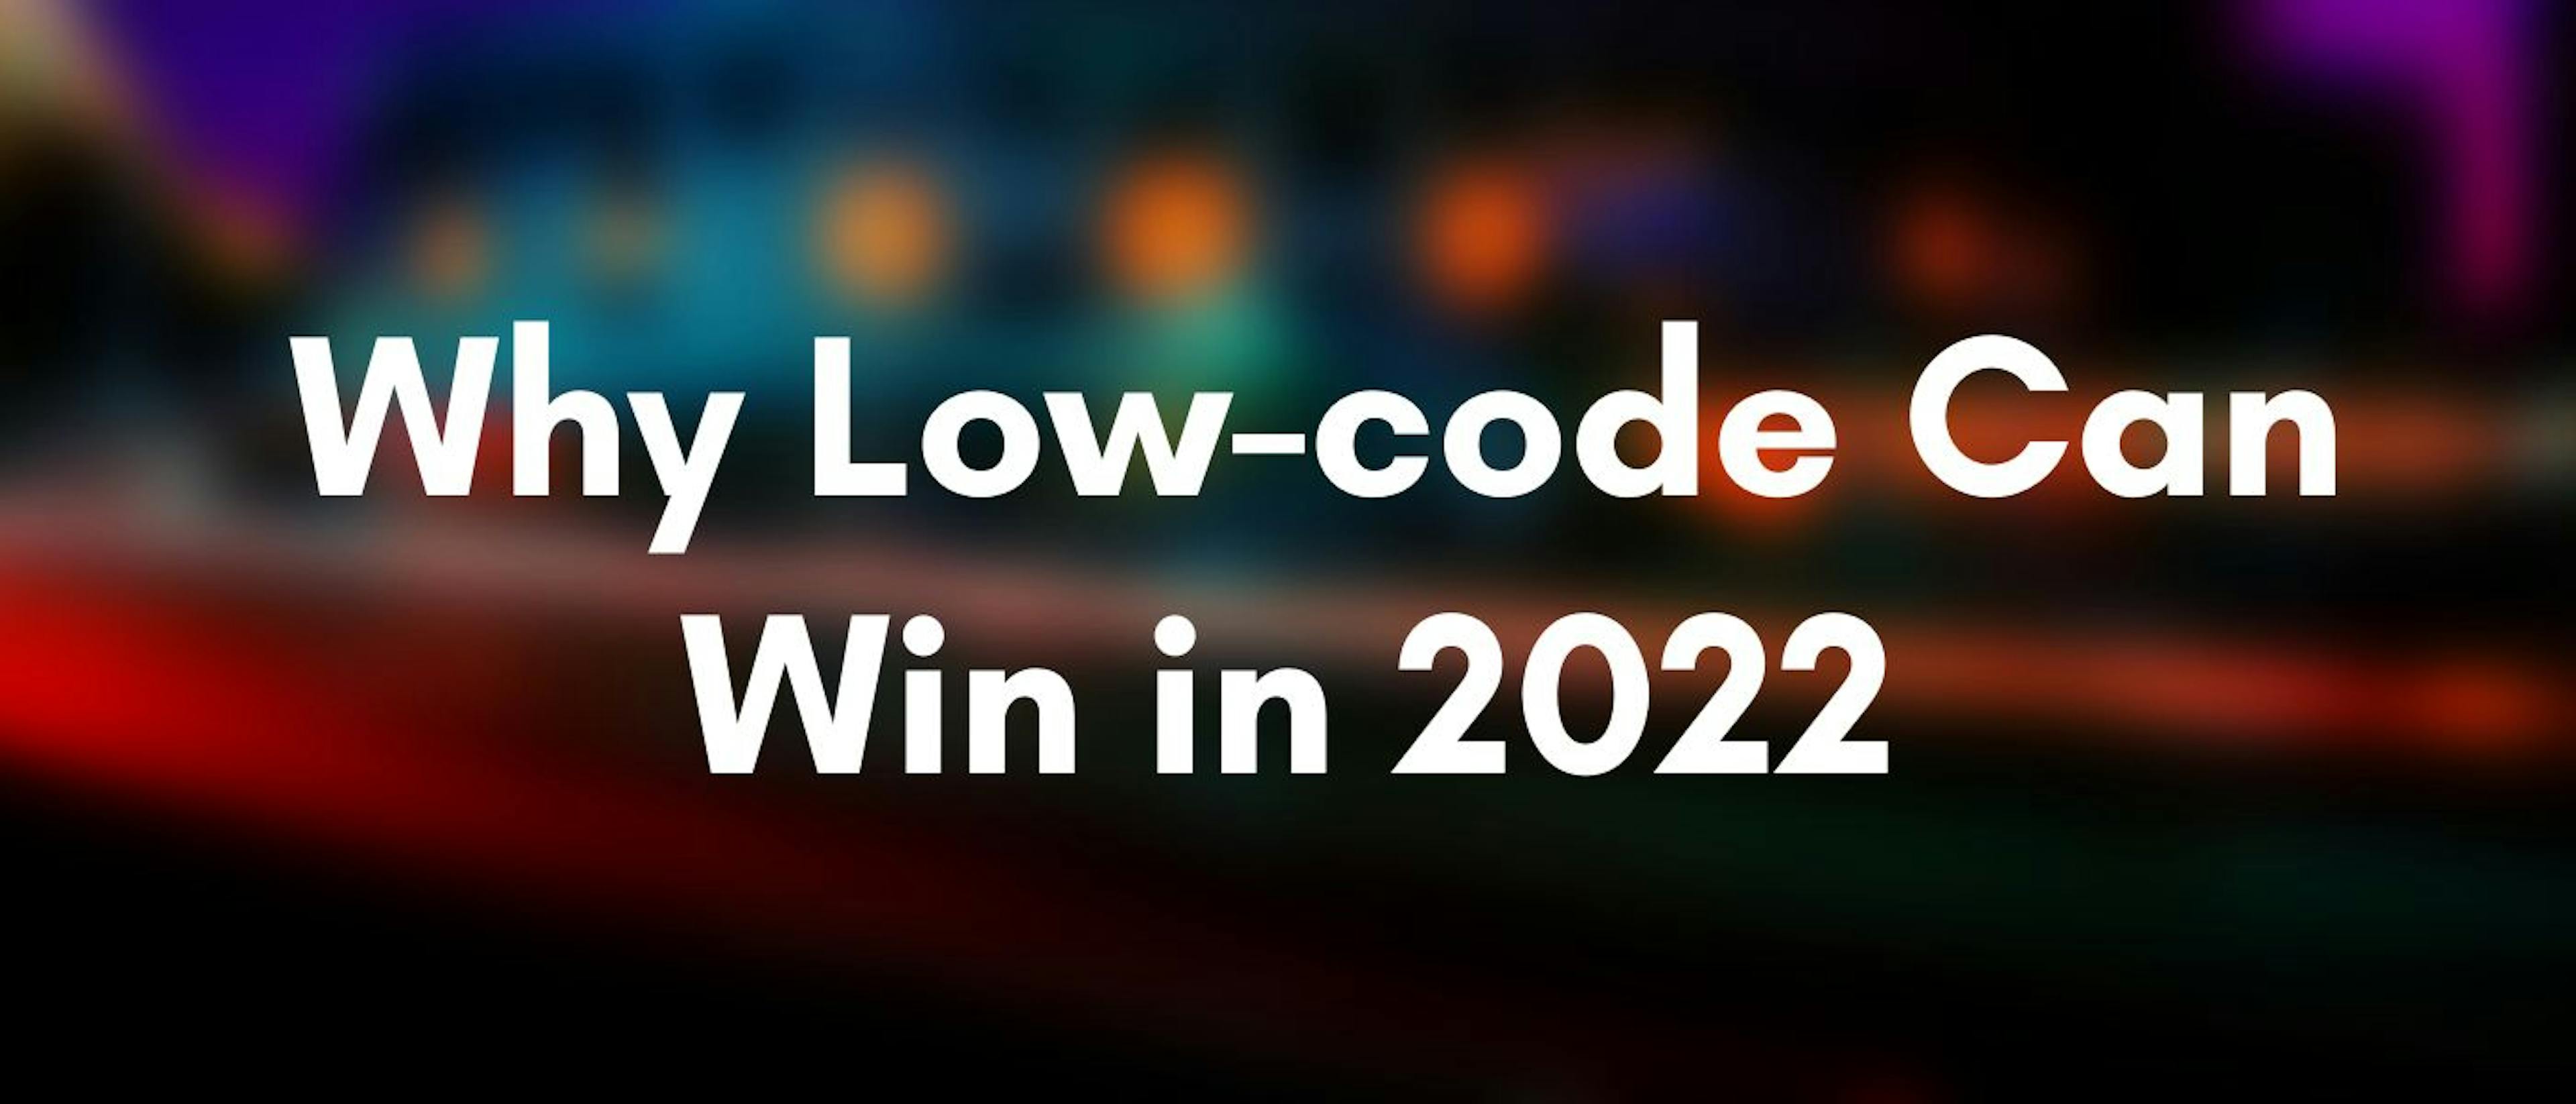 featured image - Considering Low-code in 2022? Here's Why Linx Should be Your Platform of Choice